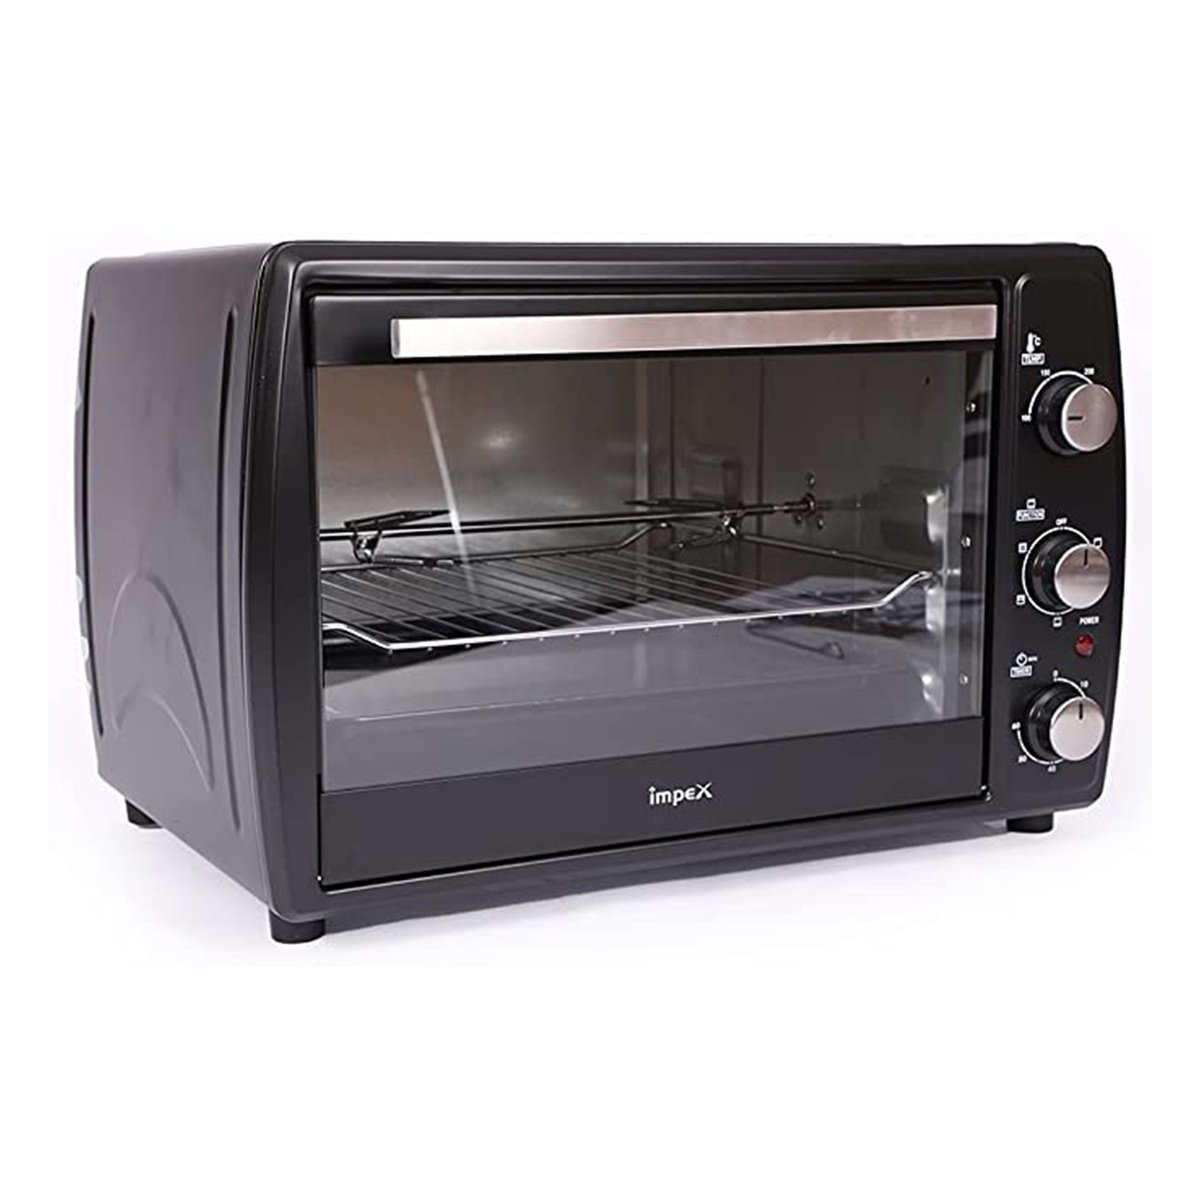 Impex Electric Oven OV2903 63 Ltr